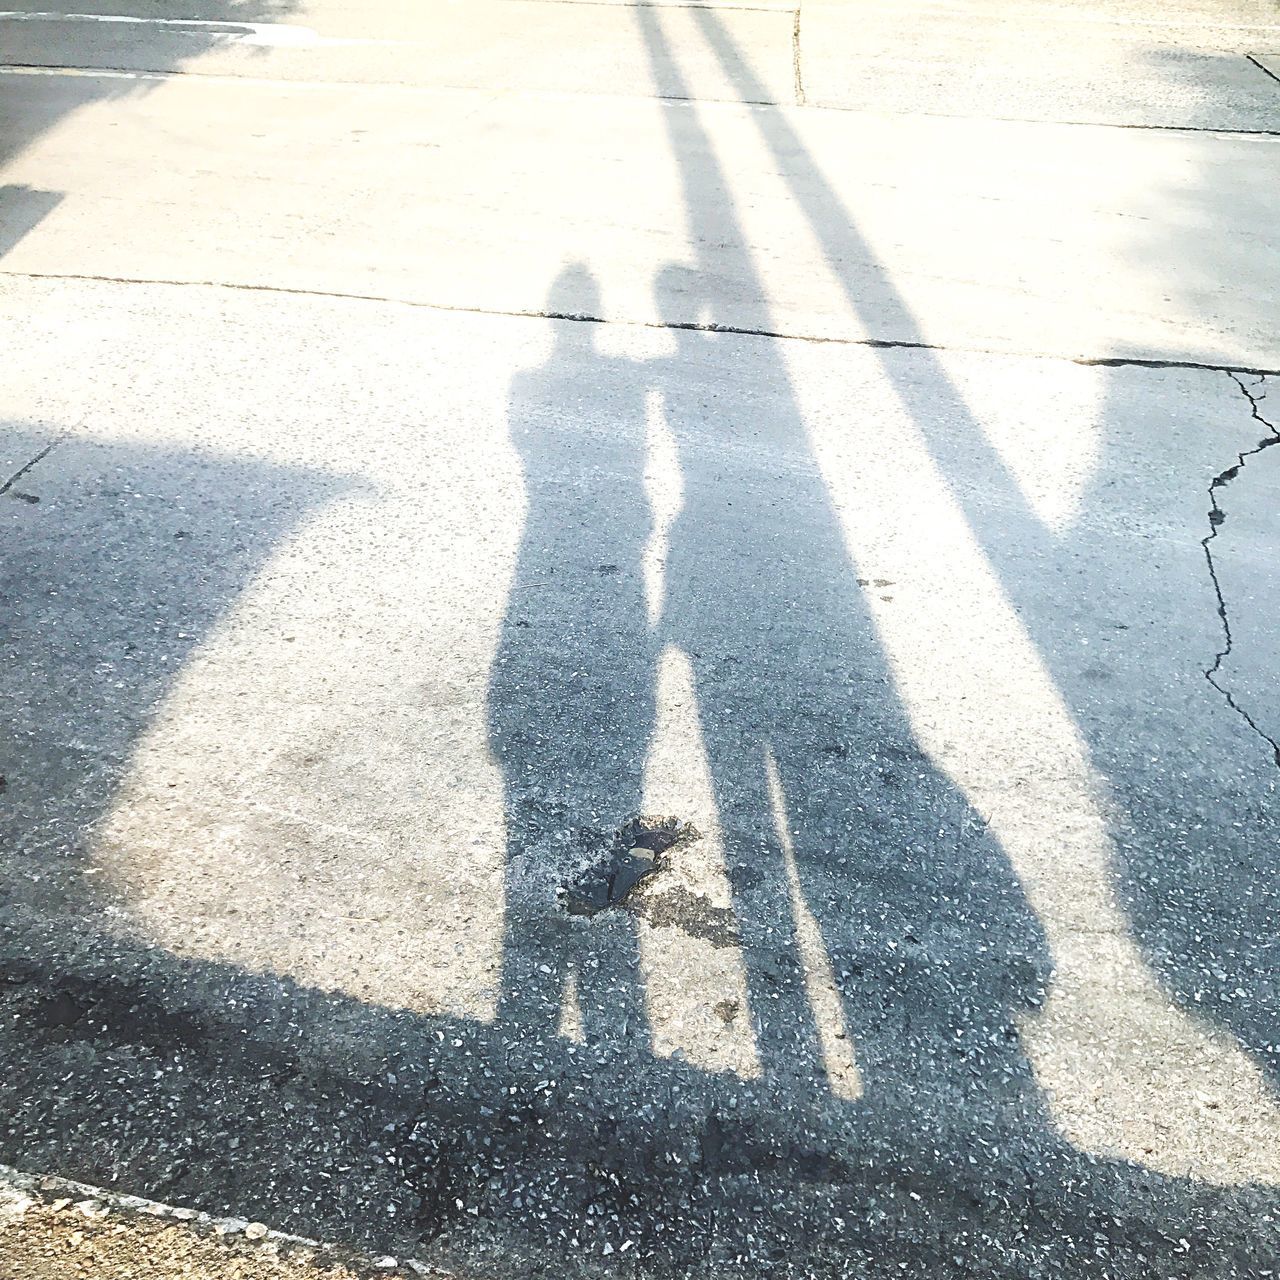 SHADOW OF PEOPLE ON ROAD